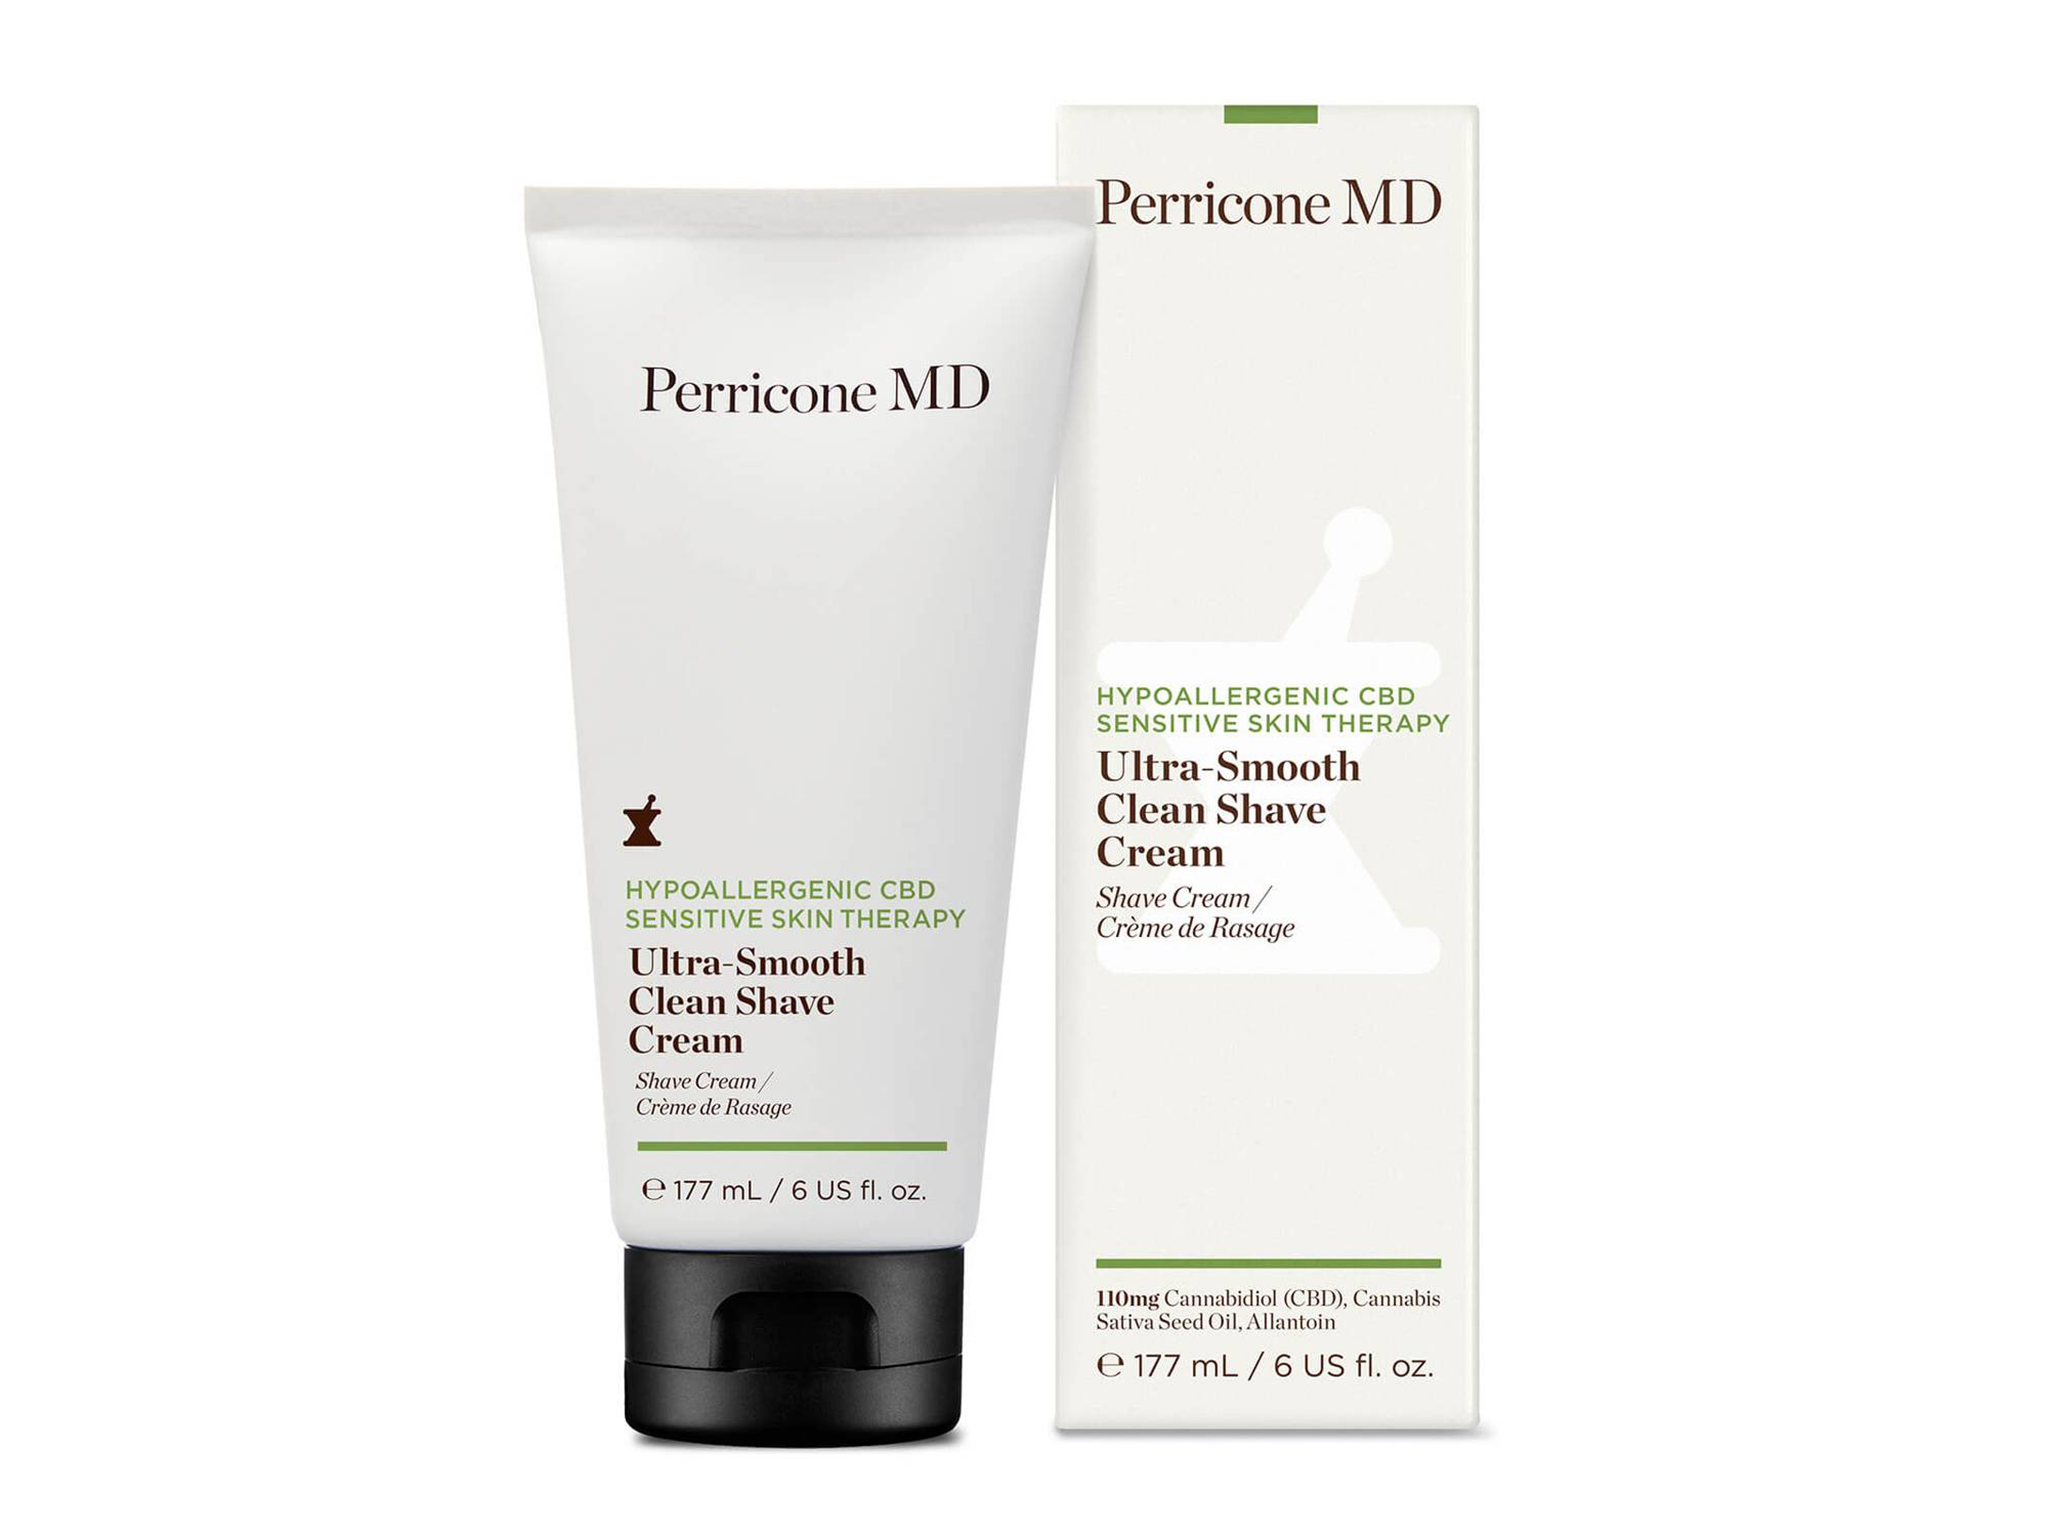 Perricone MD hypoallergenic CBD sensitive skin therapy ultra-smooth clean shave cream